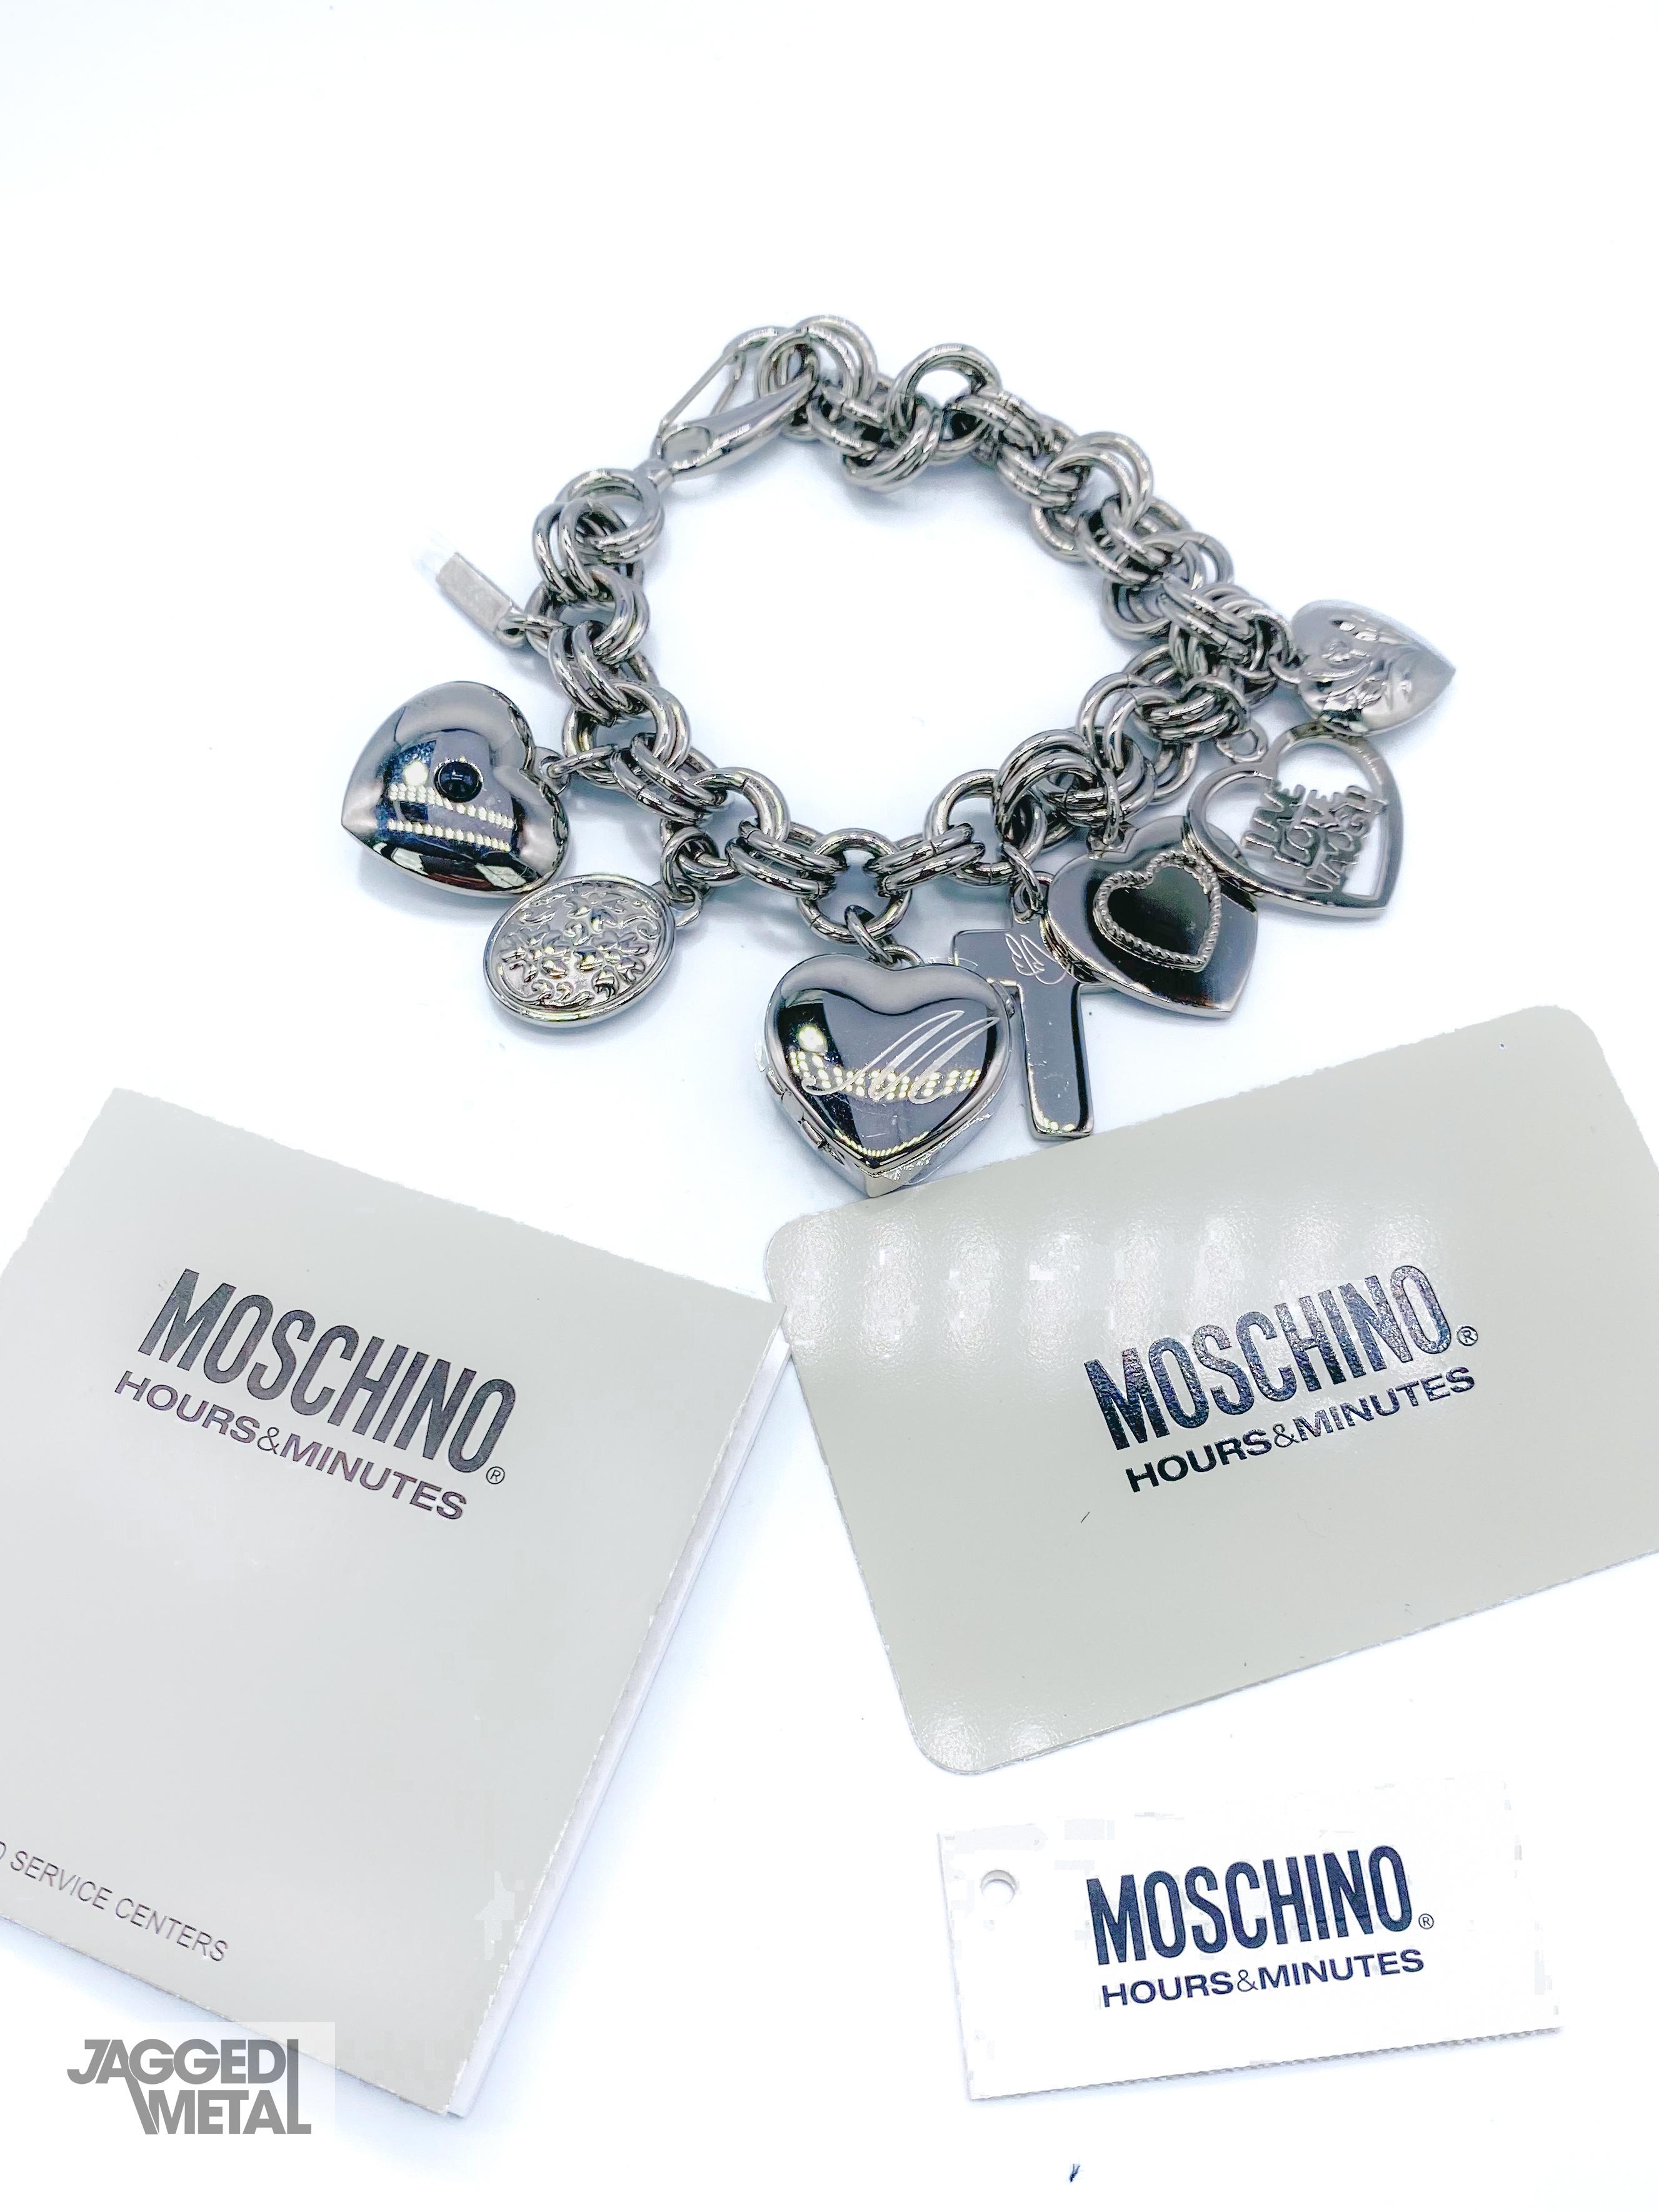 Moschino Y2k 'Live Love Laugh' Charm Bracelet with Watch

An incredible collectable statement piece from the iconic Moschino

Detail
-Made in the early 2000s from stainless steel
-Features 8 charms one of which is a heart shaped waterproof